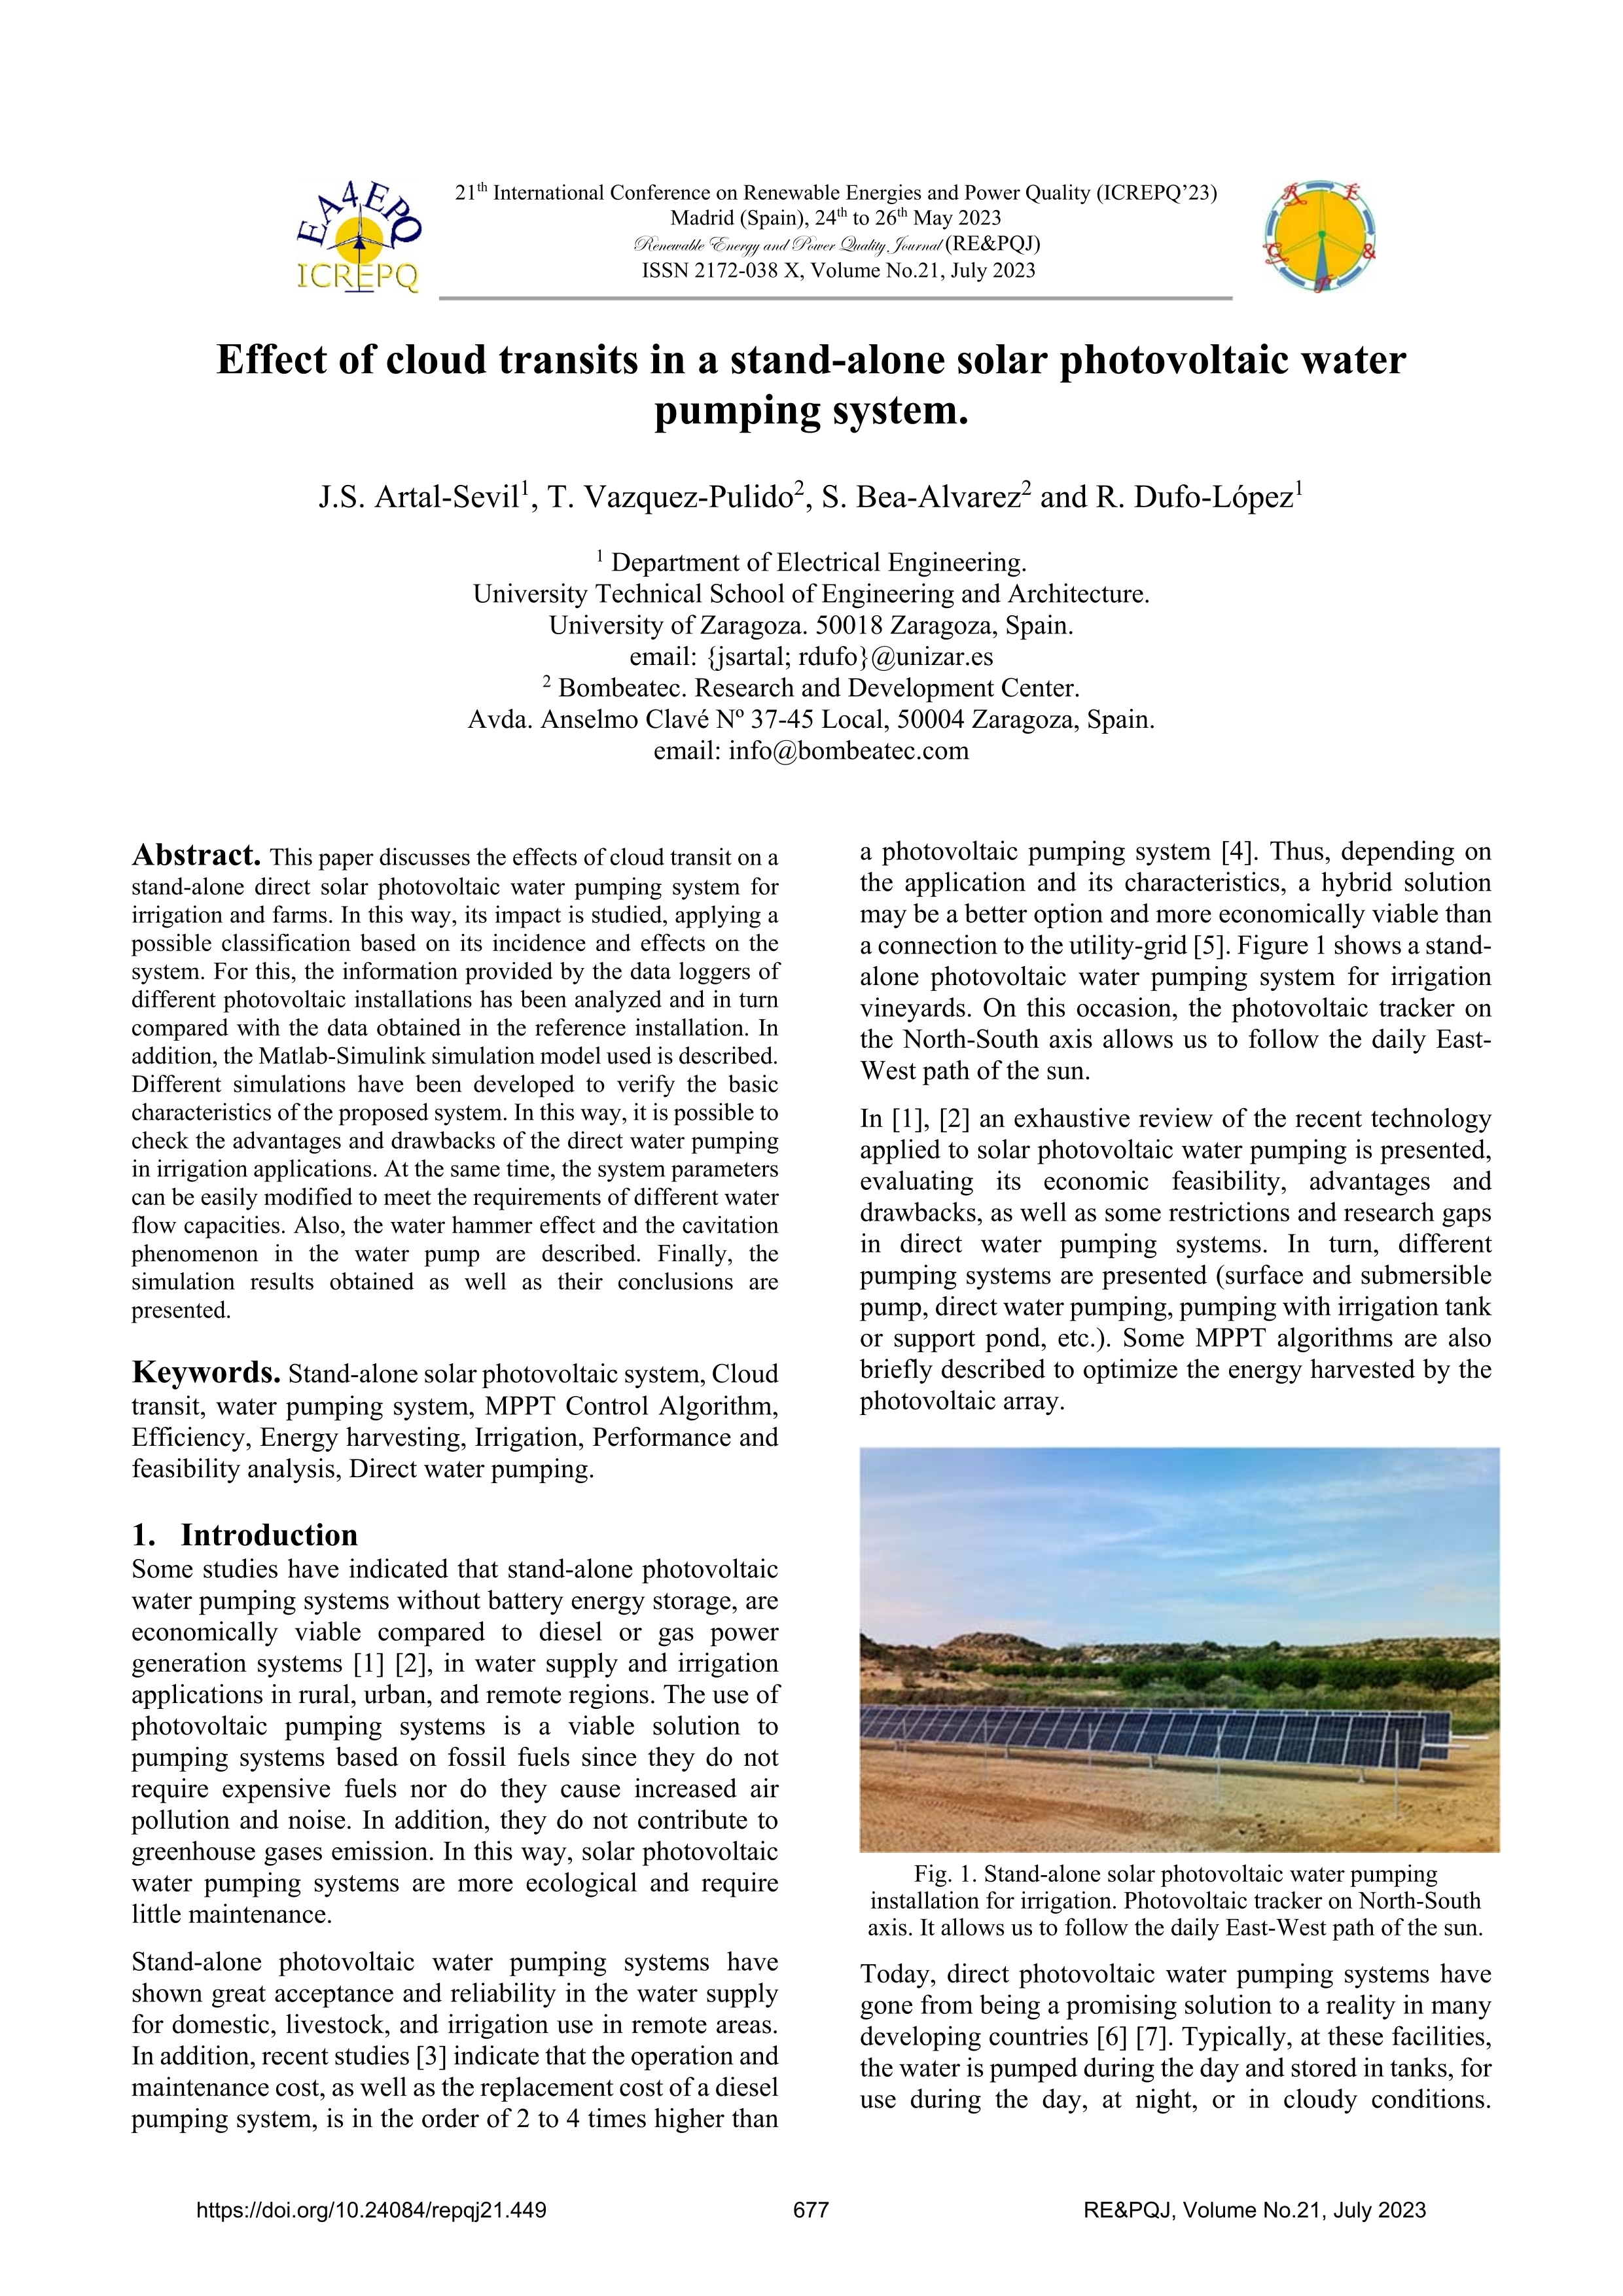 Effect of cloud transits in a stand-alone solar photovoltaic water pumping system